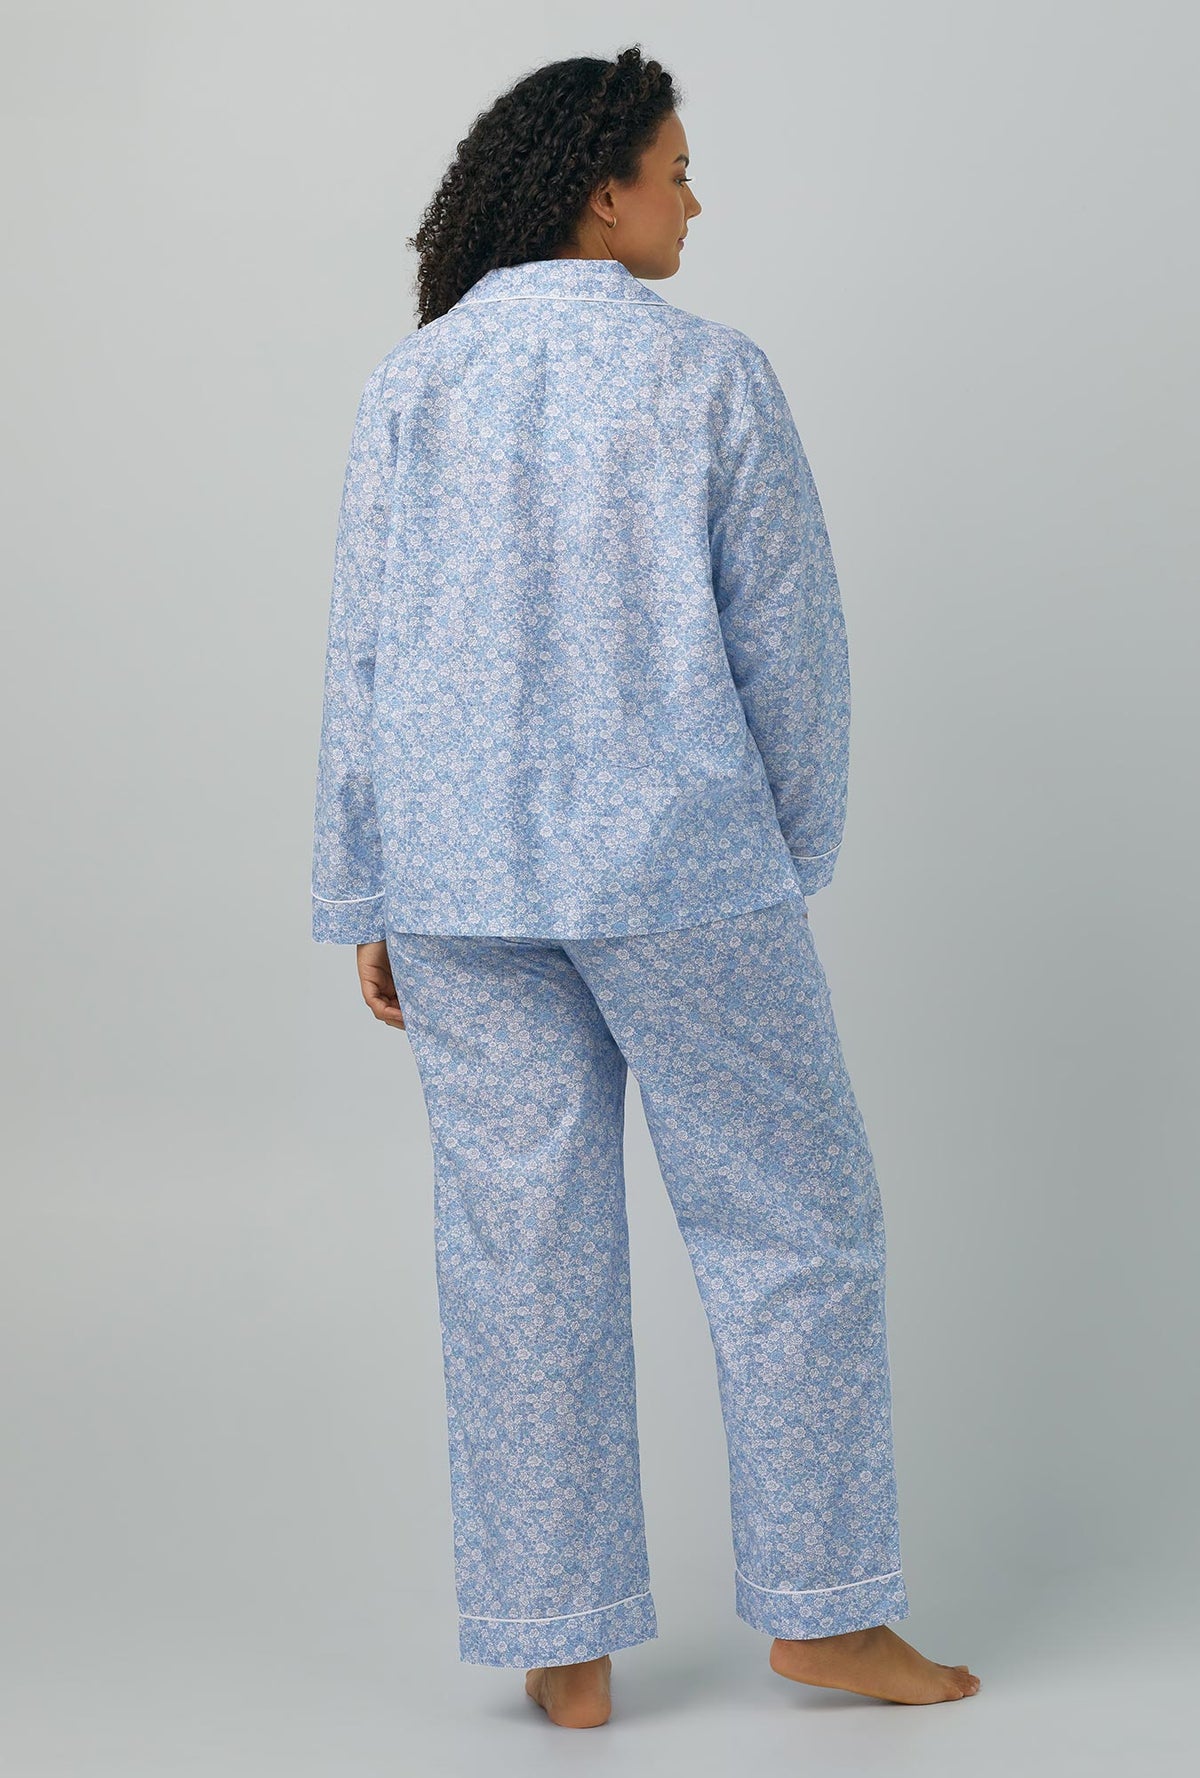 A lady wearing Long Sleeve Classic Woven Cotton Silk PJ Set with something blue print